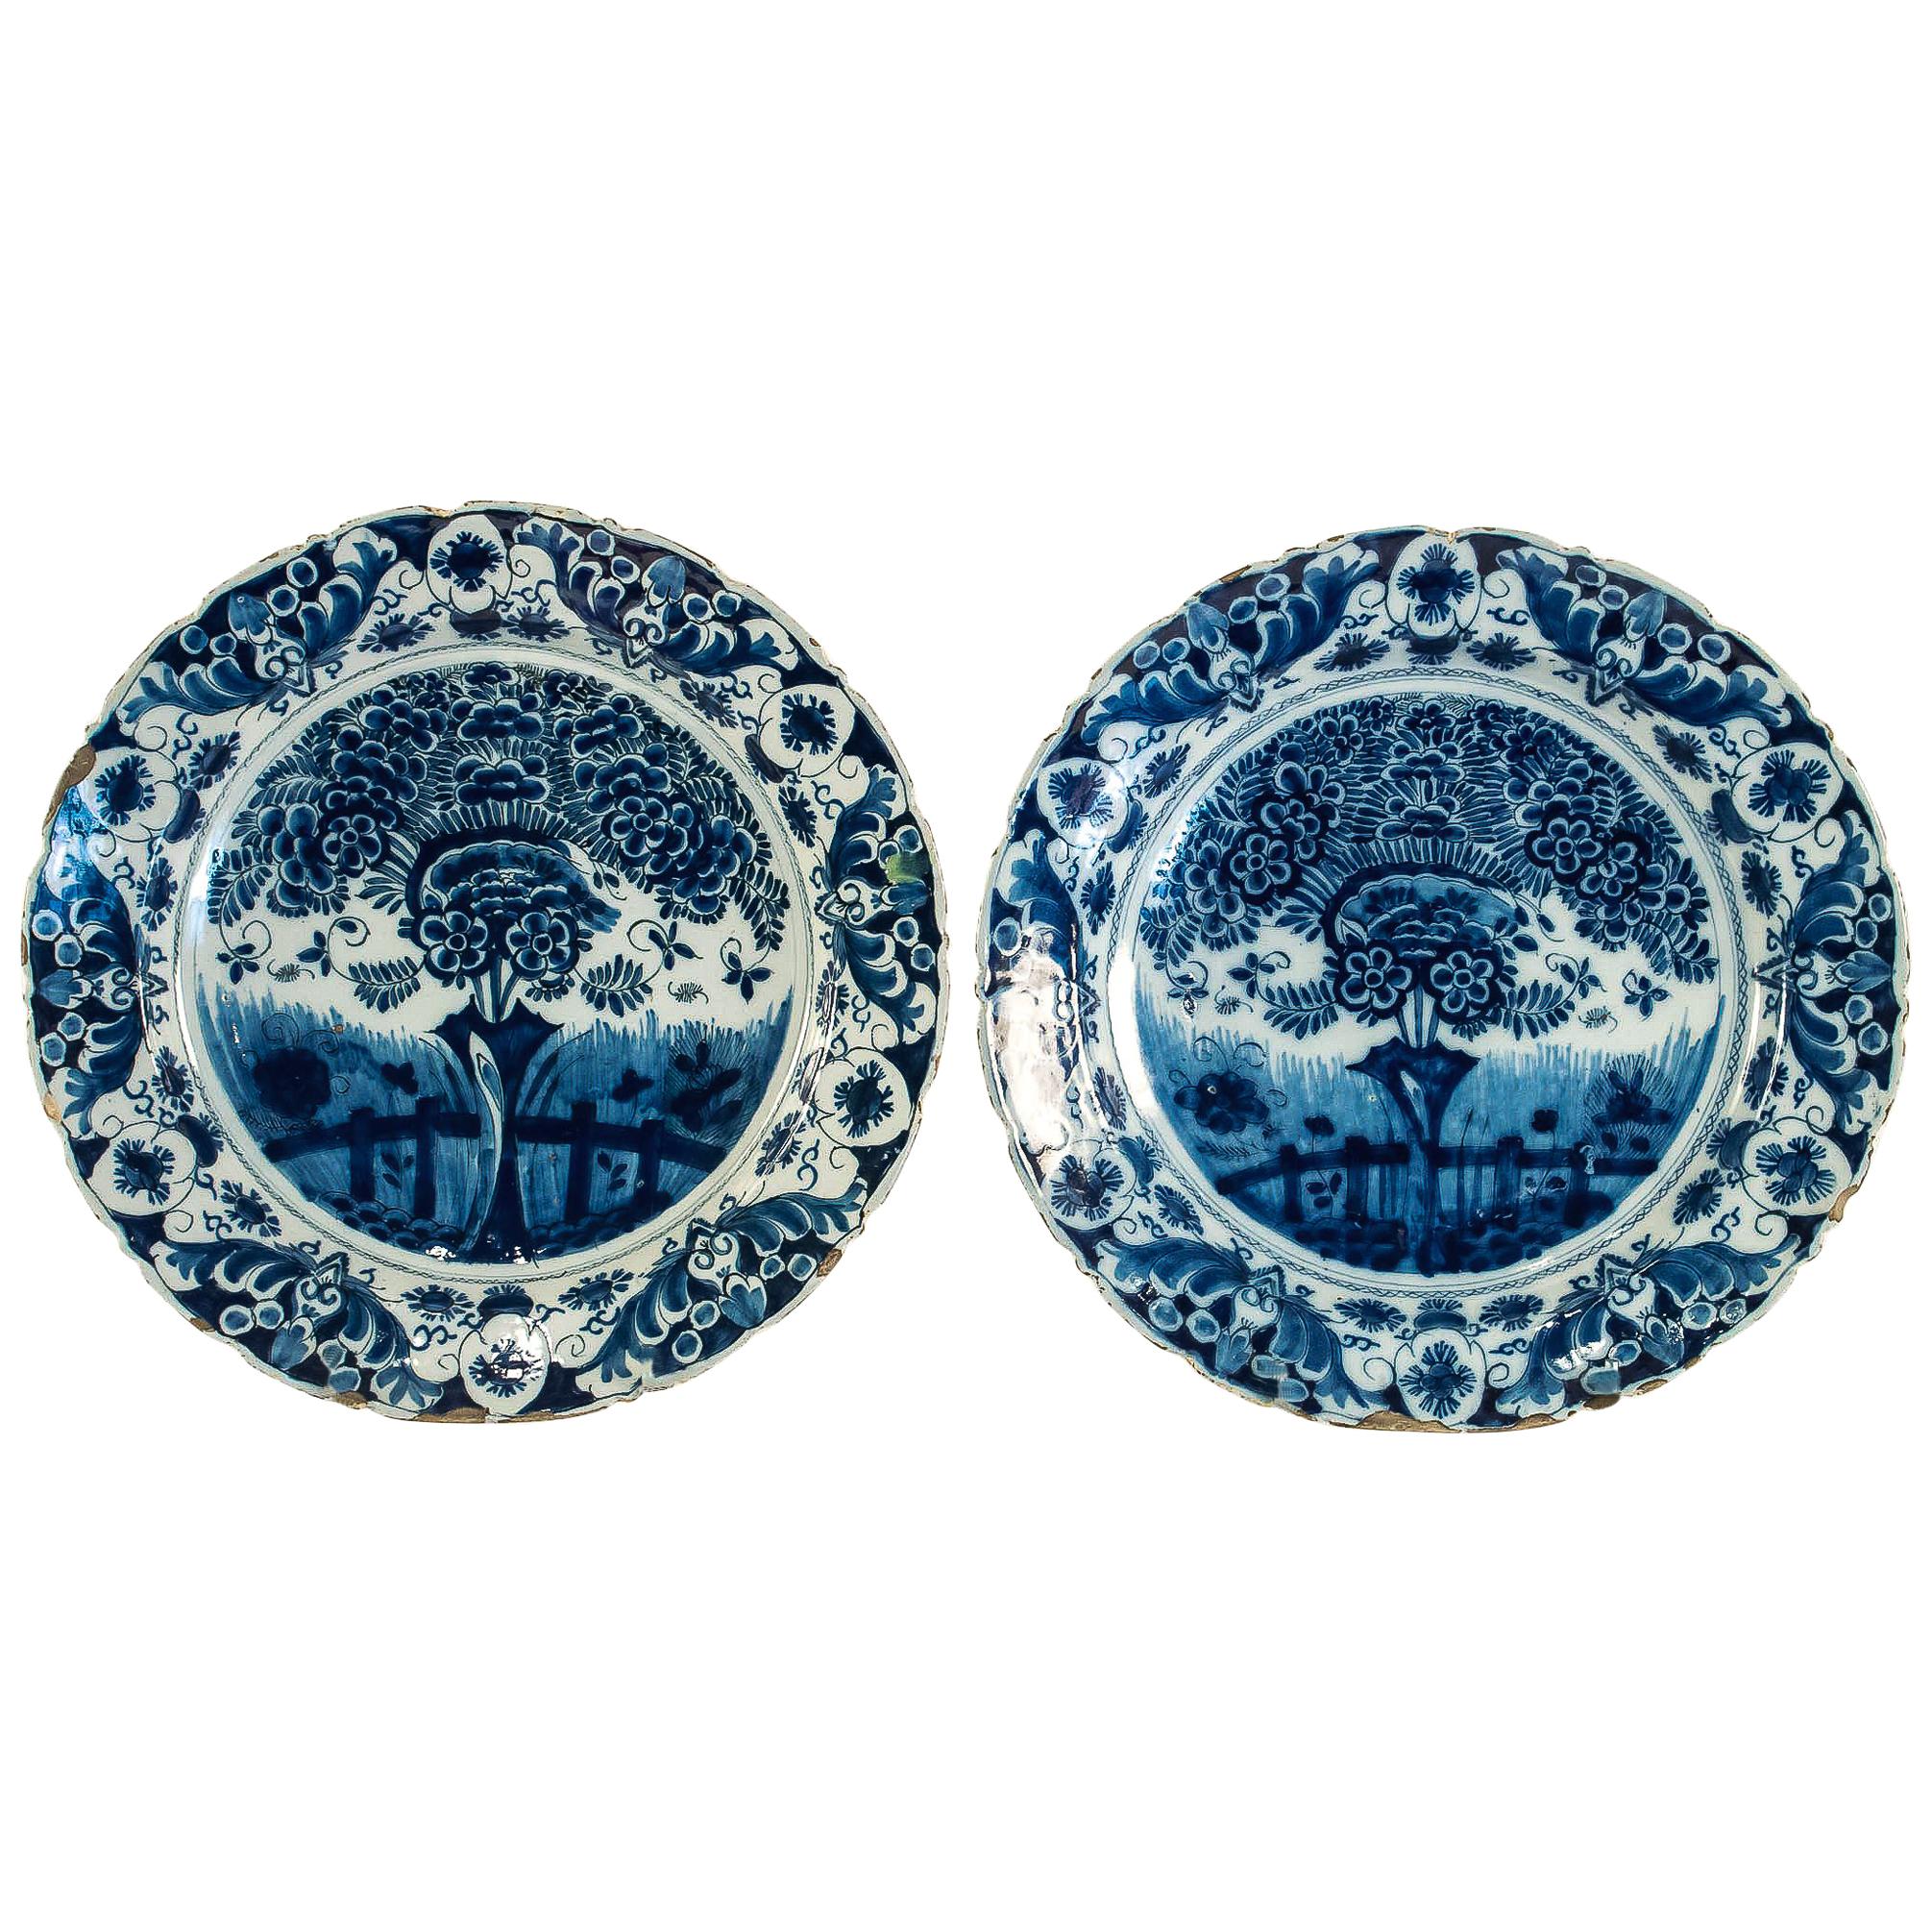 Sign by Claw 490 Brand, Early 18th Century, Pair of Faience Delft Round Dishes